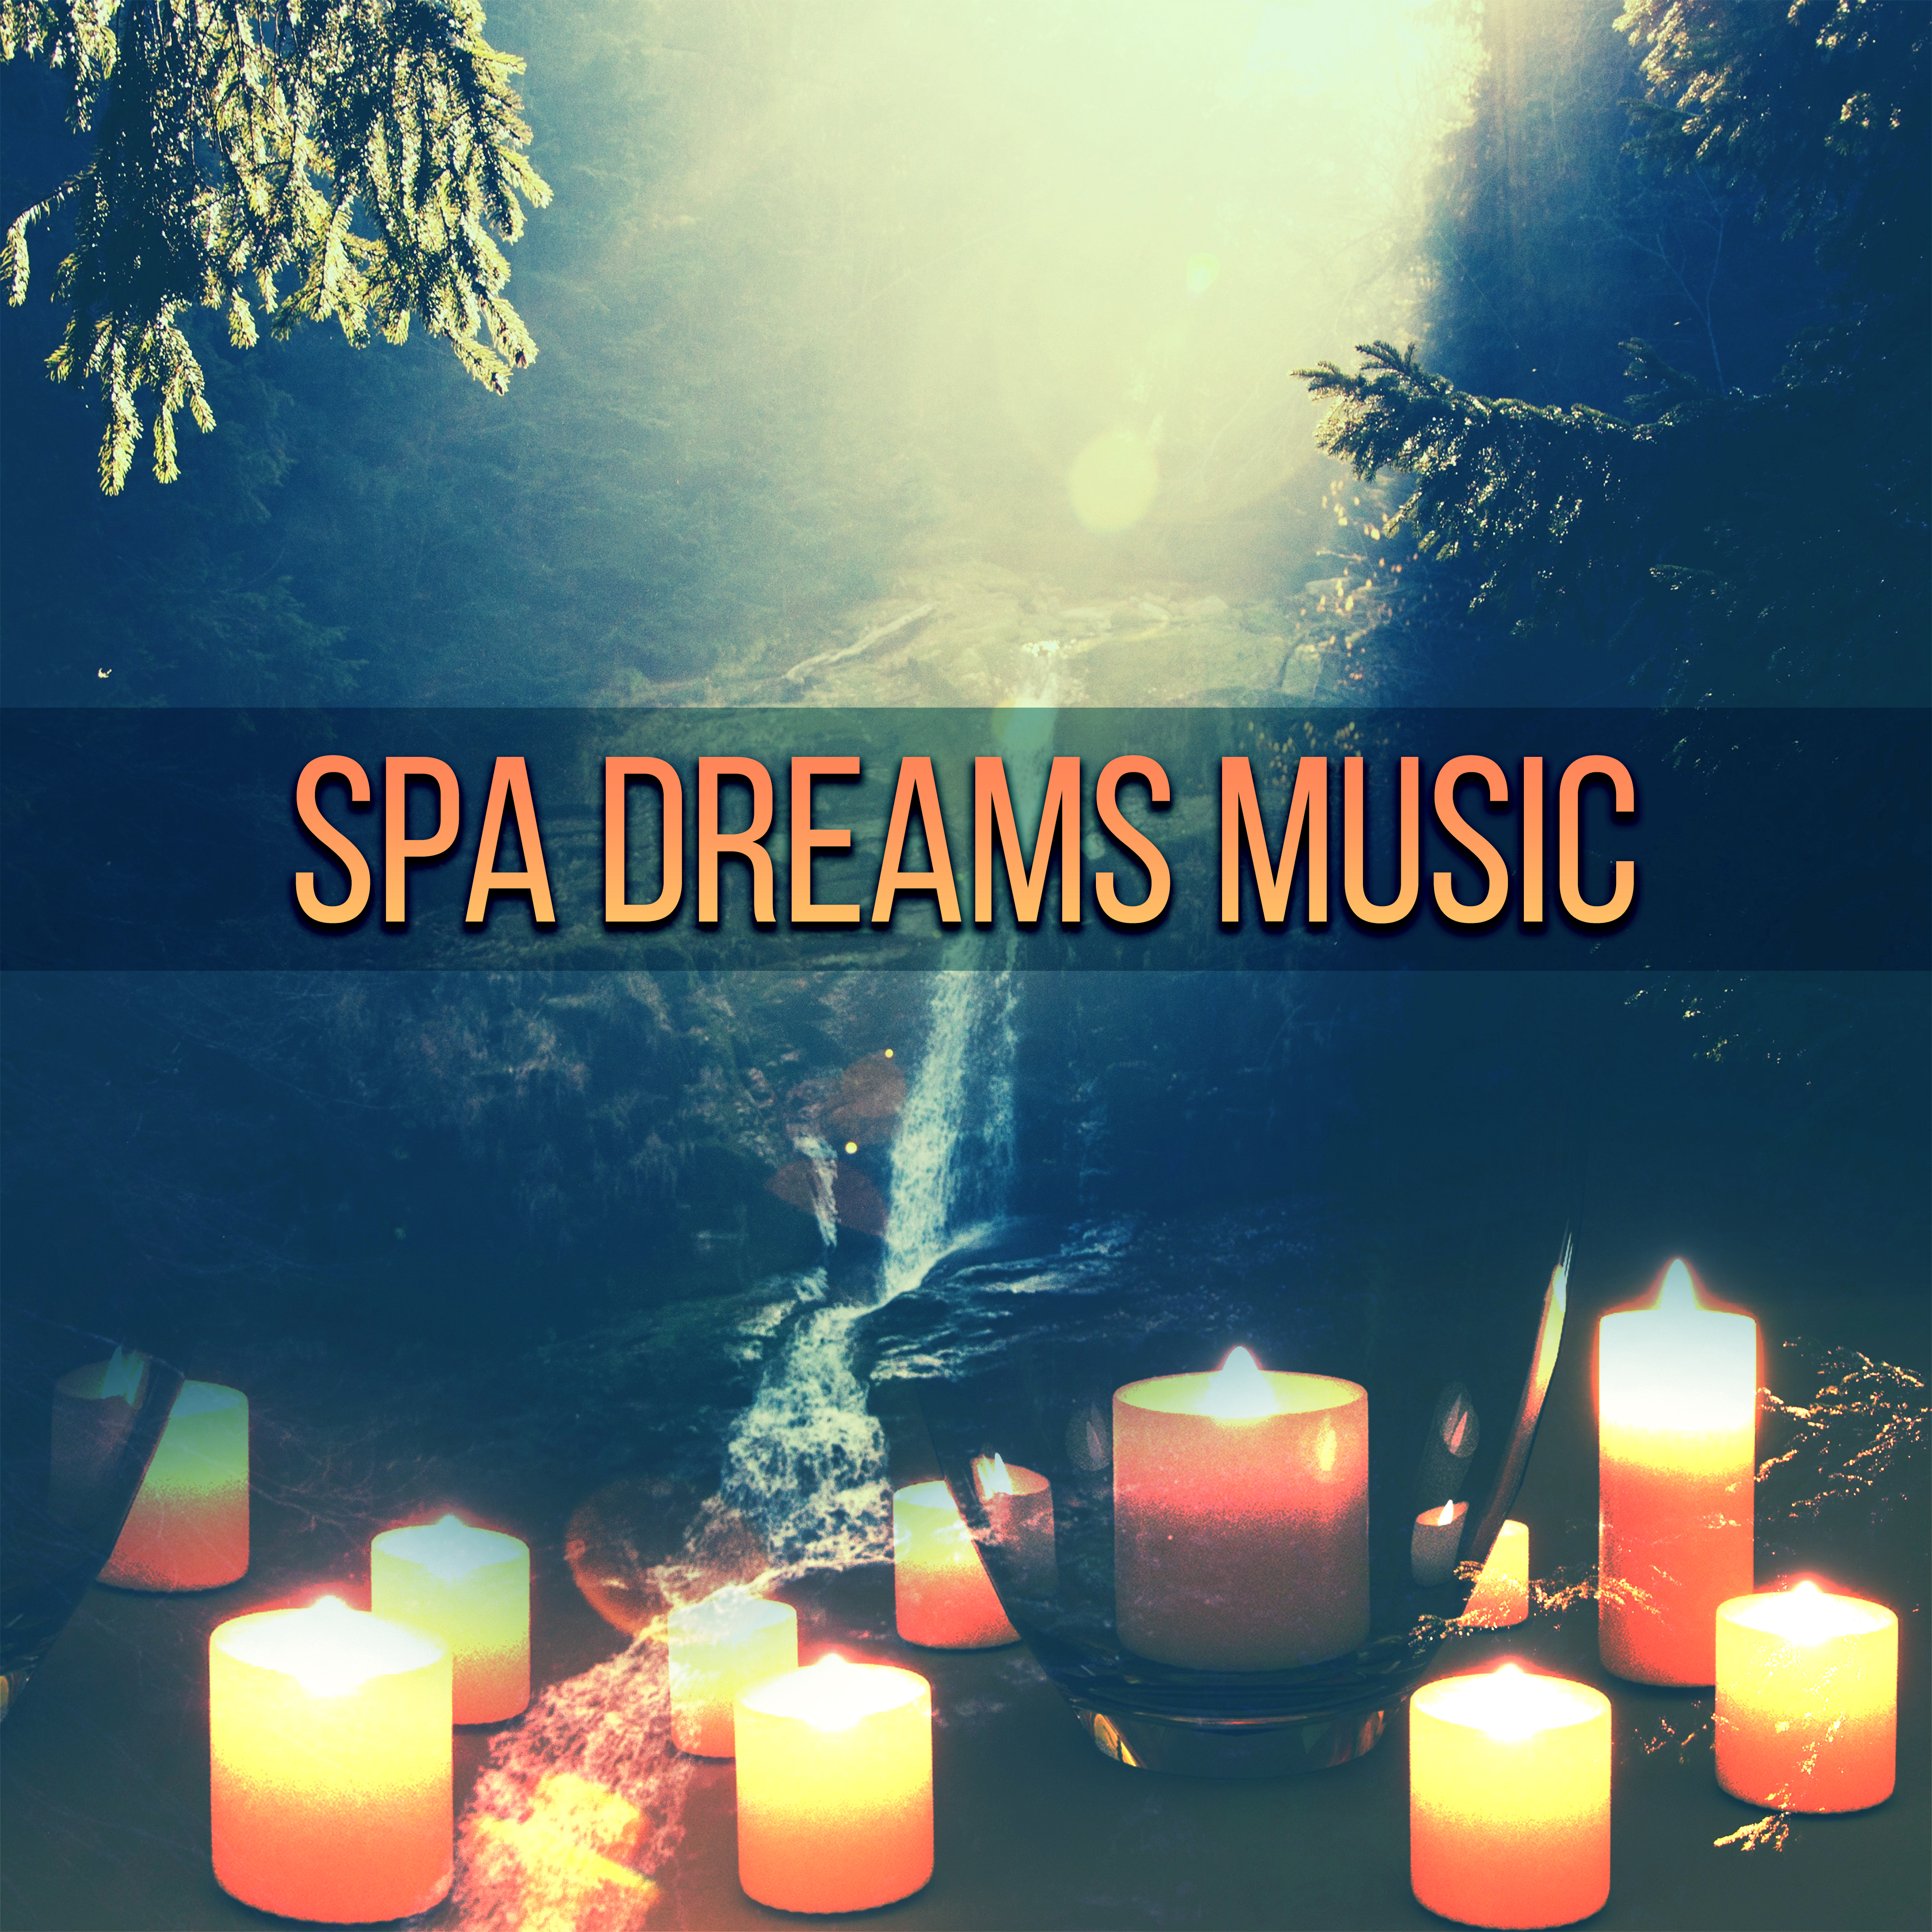 Spa Dreams Music – Calming Nature Sounds for Spa & Wellness, Relaxing New Age, Pure Instrumental Music